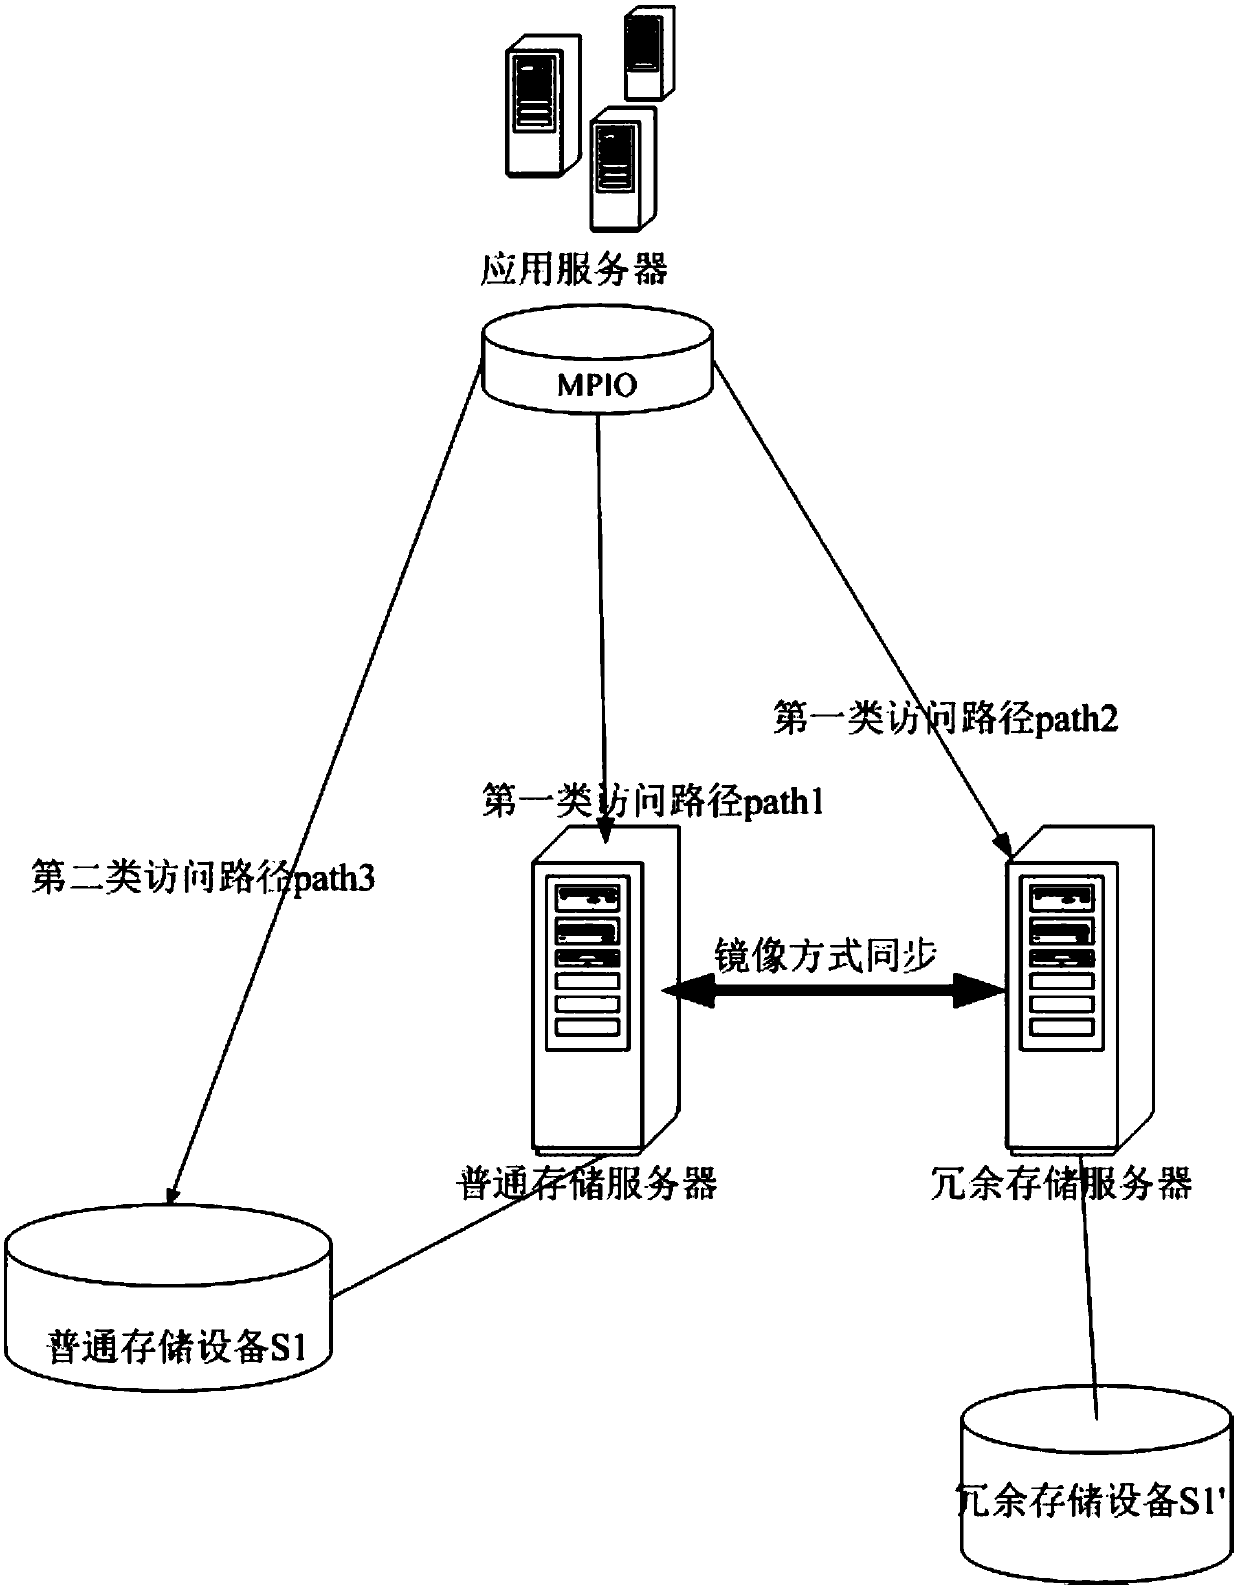 A remote dual-active method for a distributed data center, an application server and a network